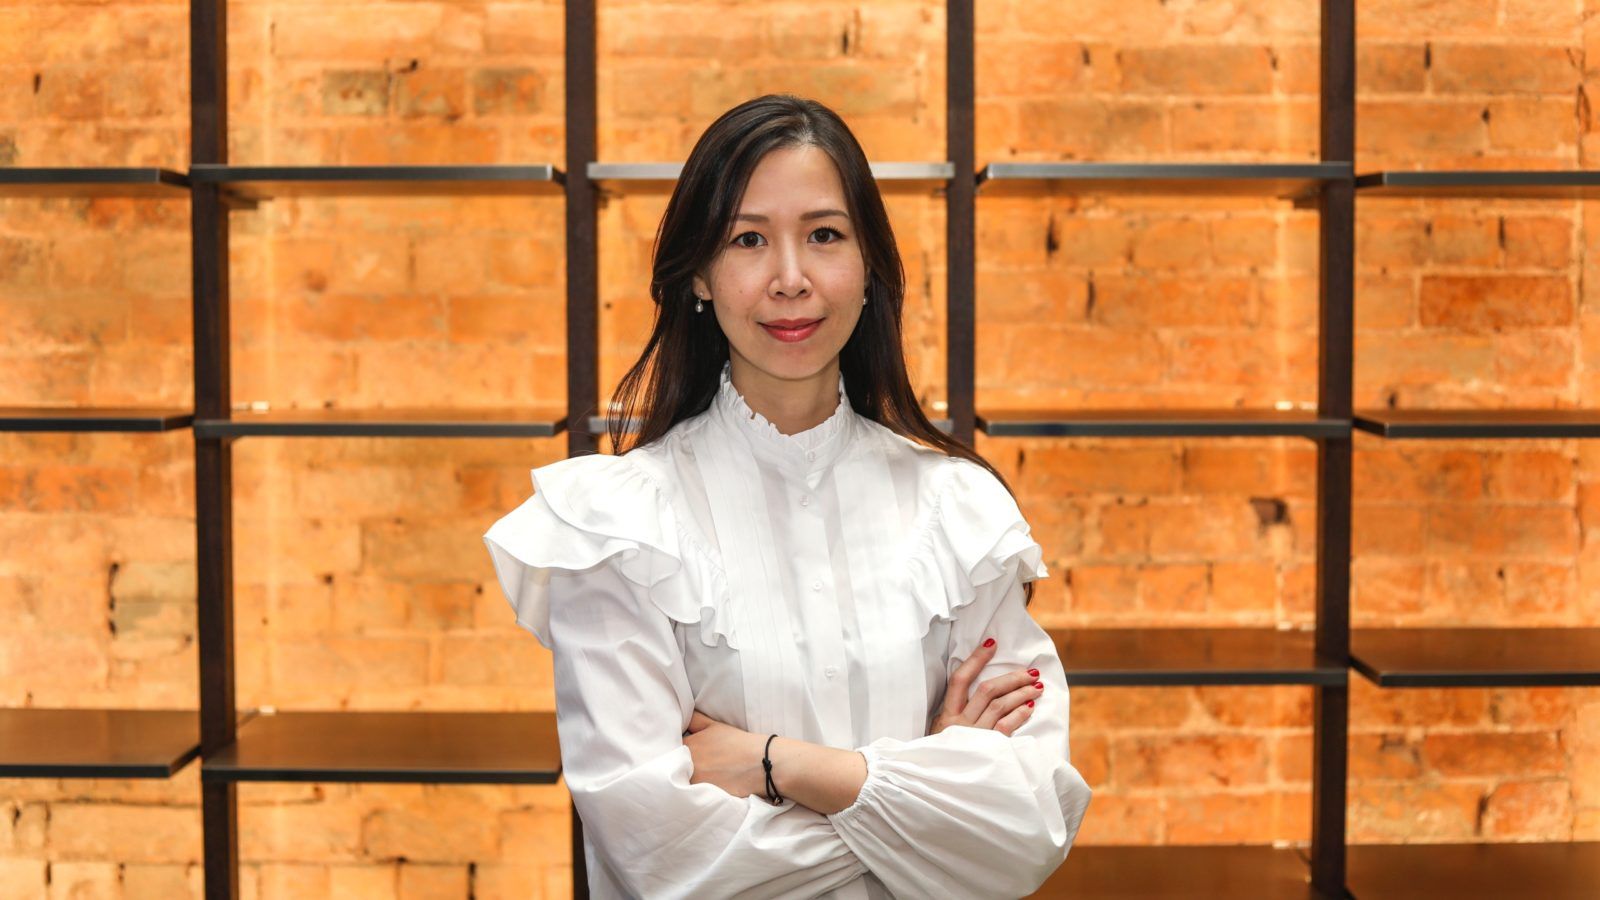 The Hit List: Crafts on Peel’s Creative Director Penelope Luk reveals her foodie alter ego